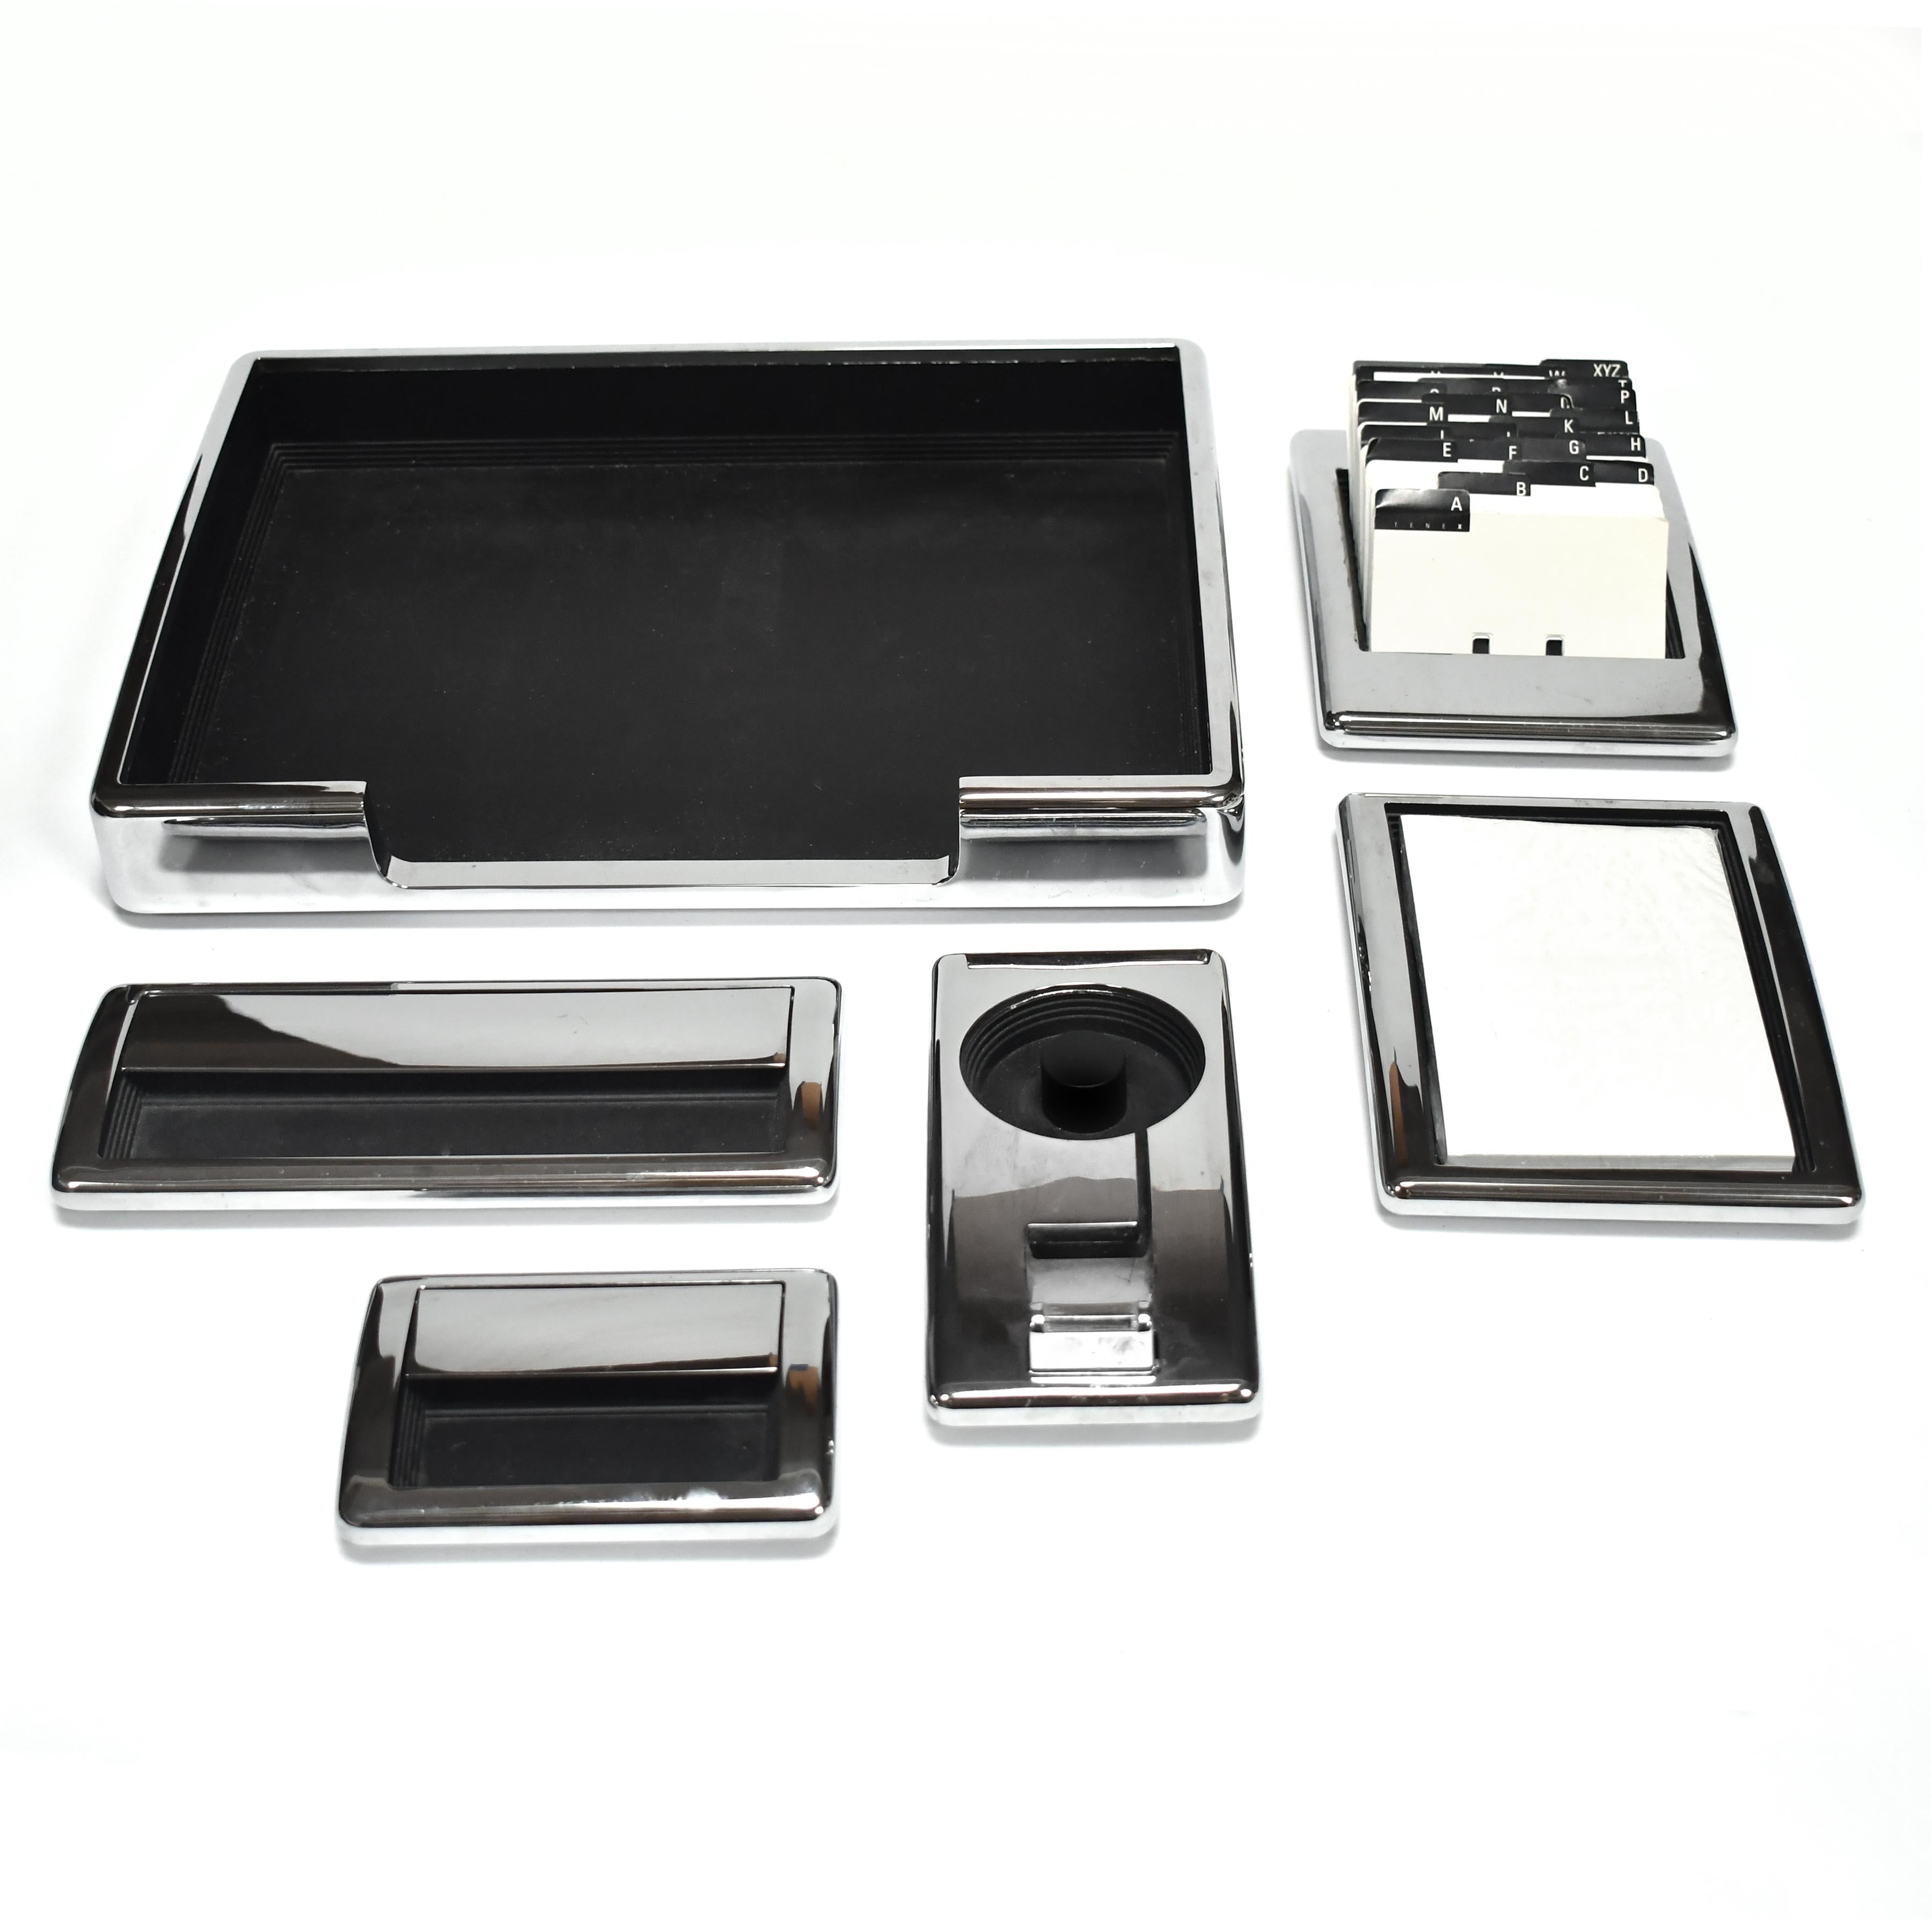 This strikingly handsome set of Tenex desktop accessories from their 500 series will have you organized in style. The sleek modernist design is only matched by the incredible quality of construction. The pieces have great heft and finishing details.